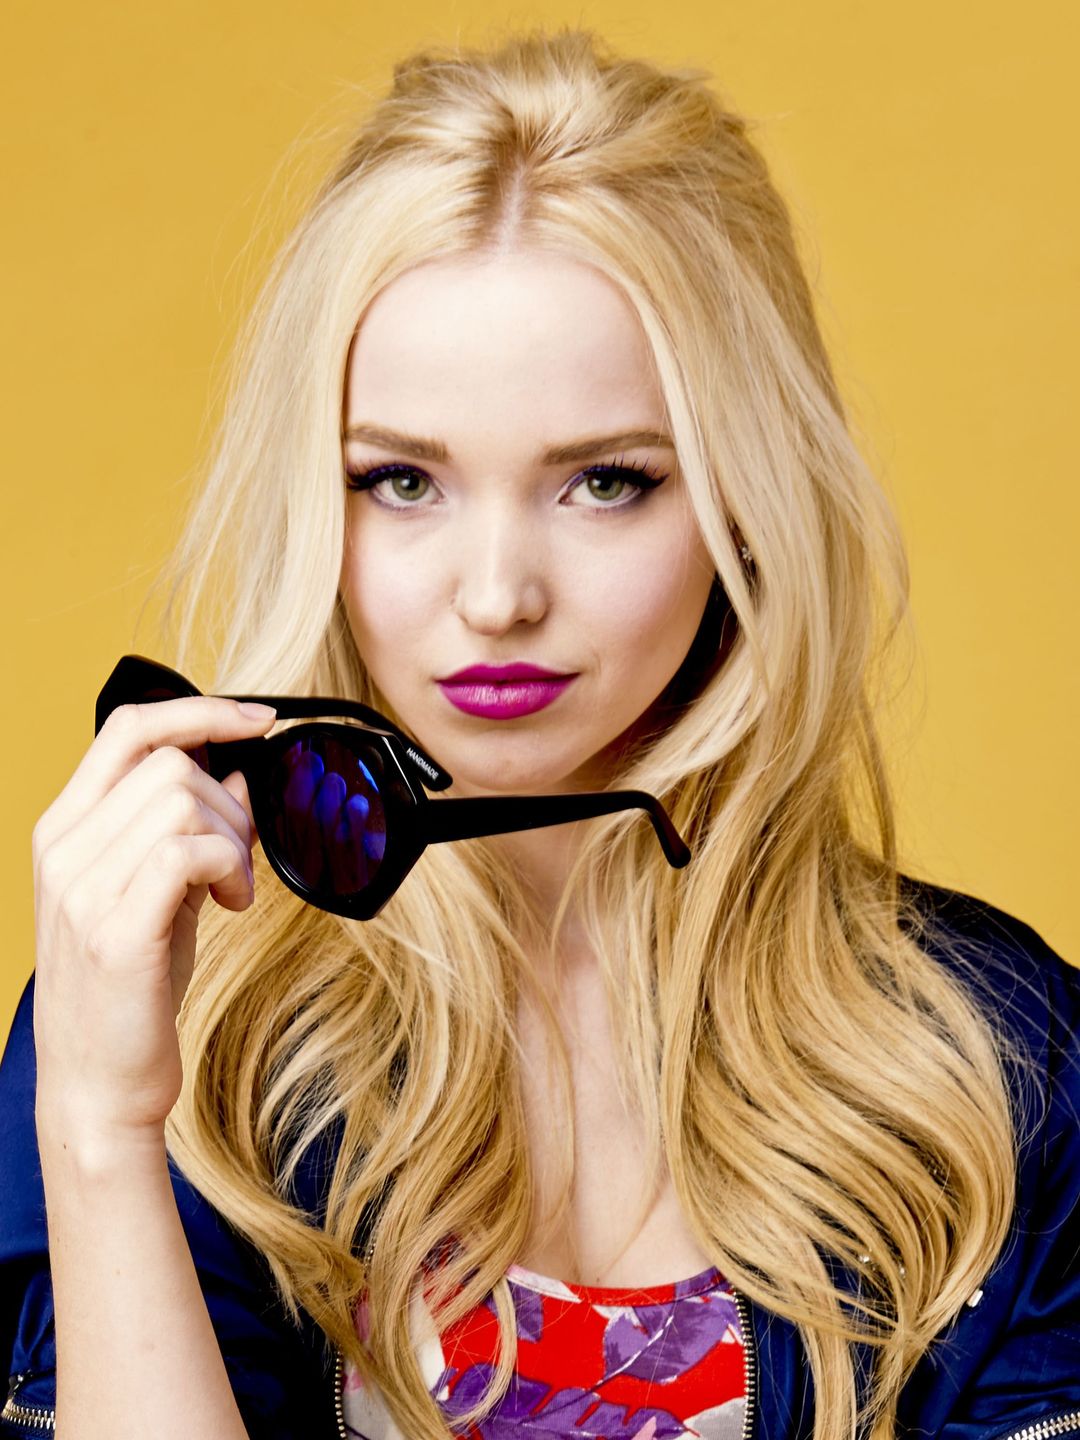 Dove Cameron who is her father